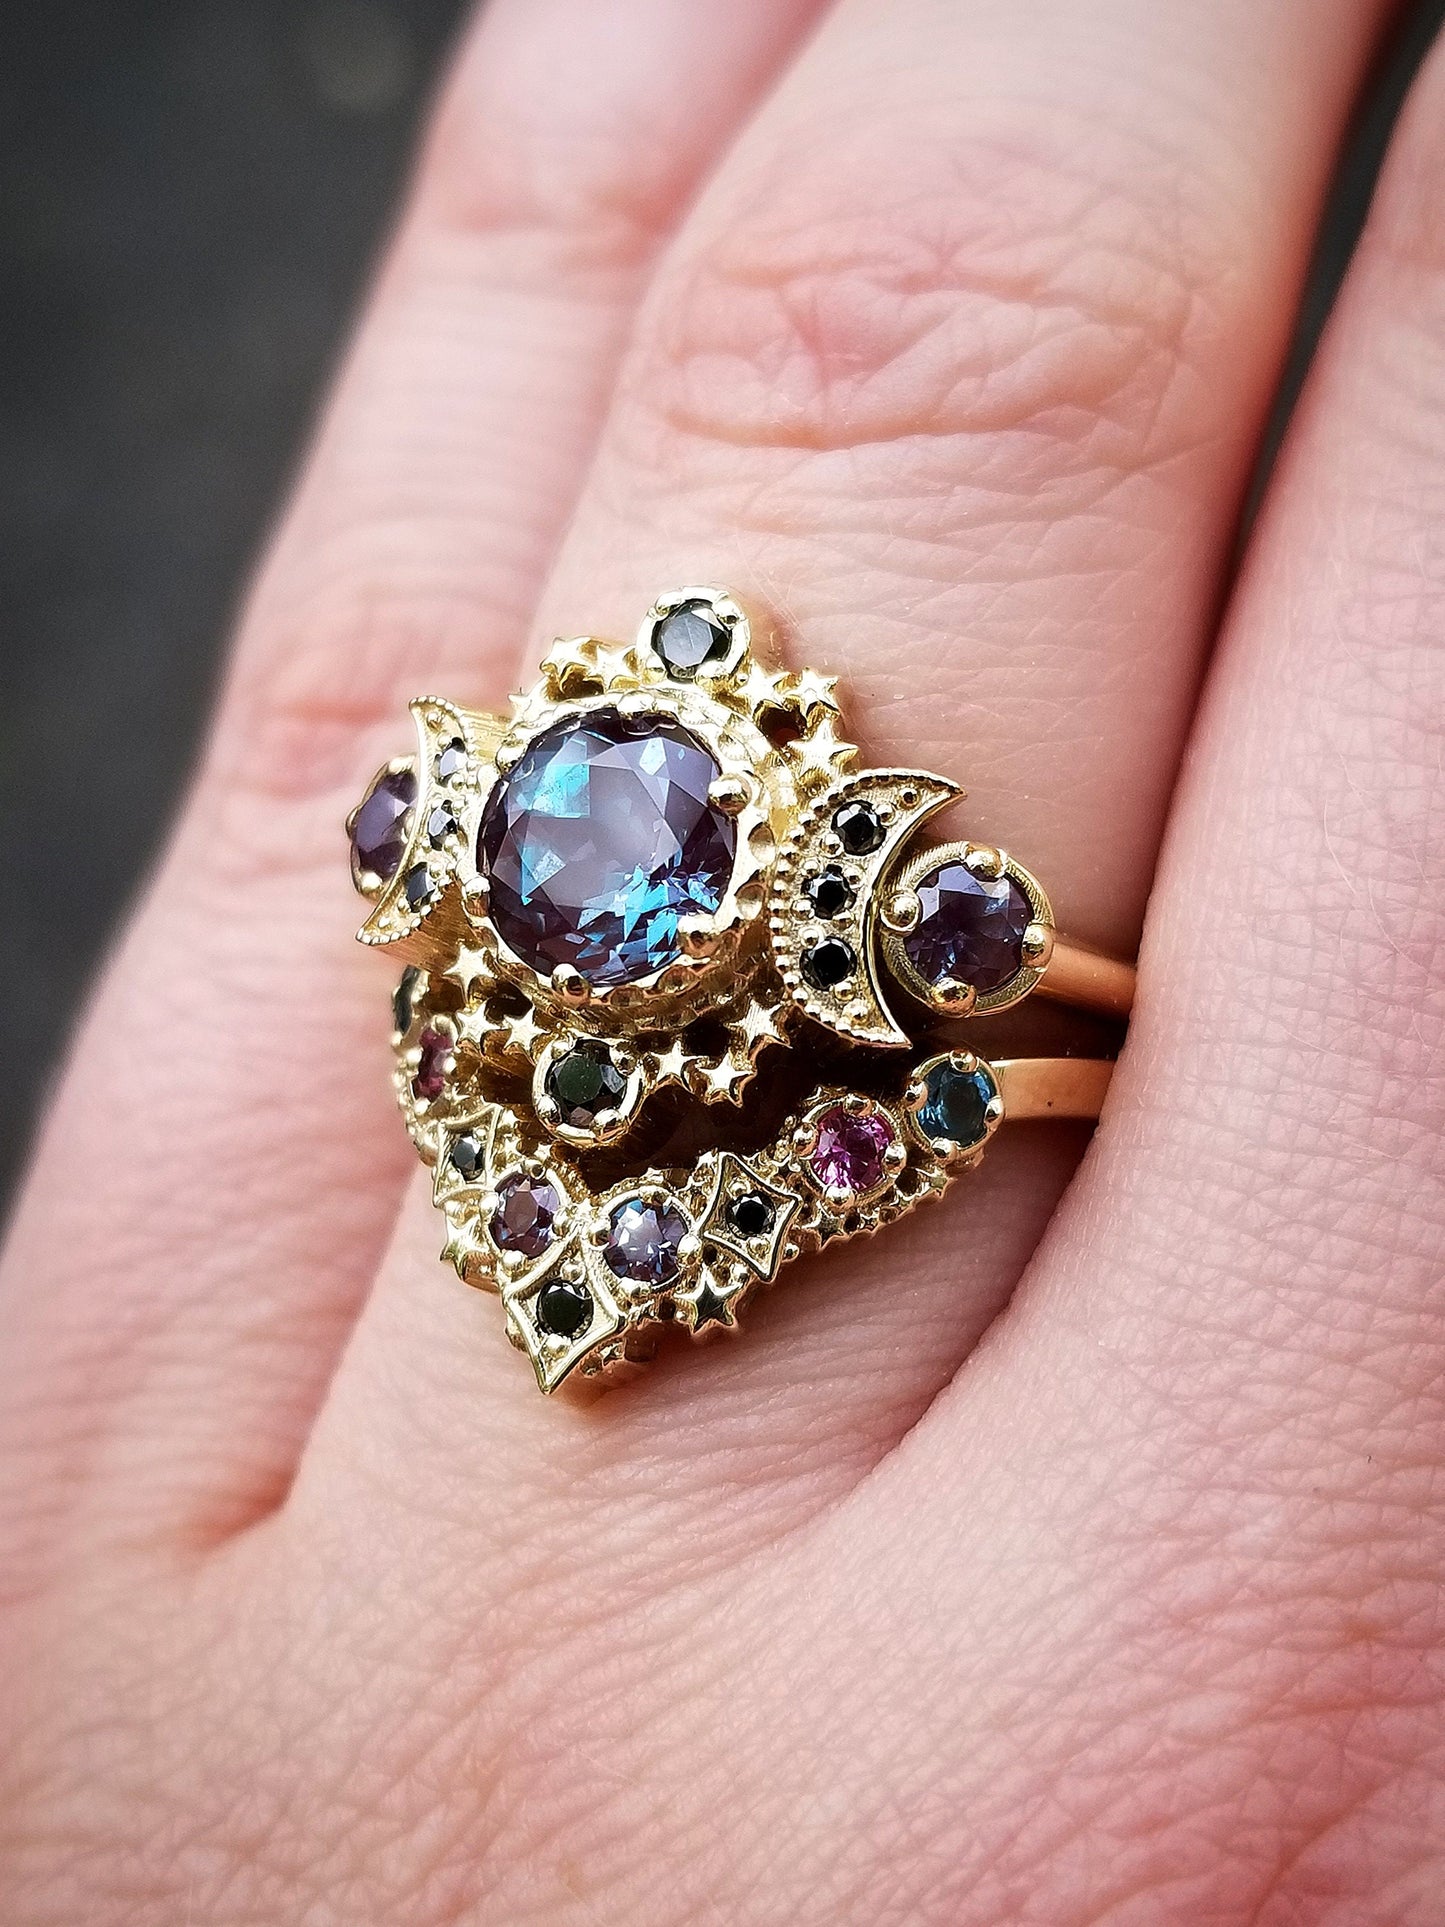 Deep Space Chatham Alexandrite and Black Diamond Cosmos Moon and Star Engagement Ring Set with Nebula Stardust Chevron Wedding Band